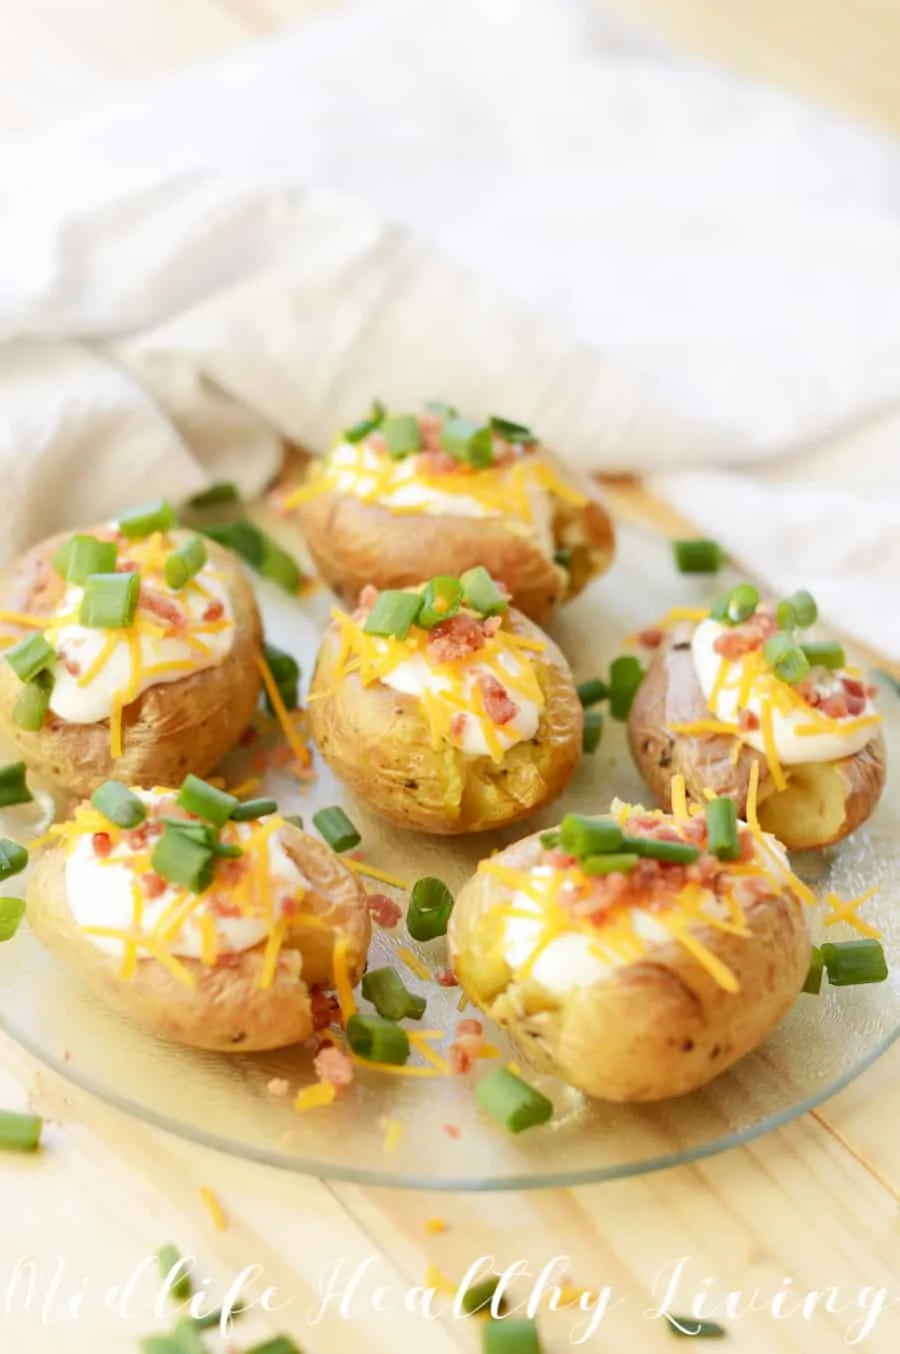 Another beautiful shot of the finished loaded air fryer baked potatoes.